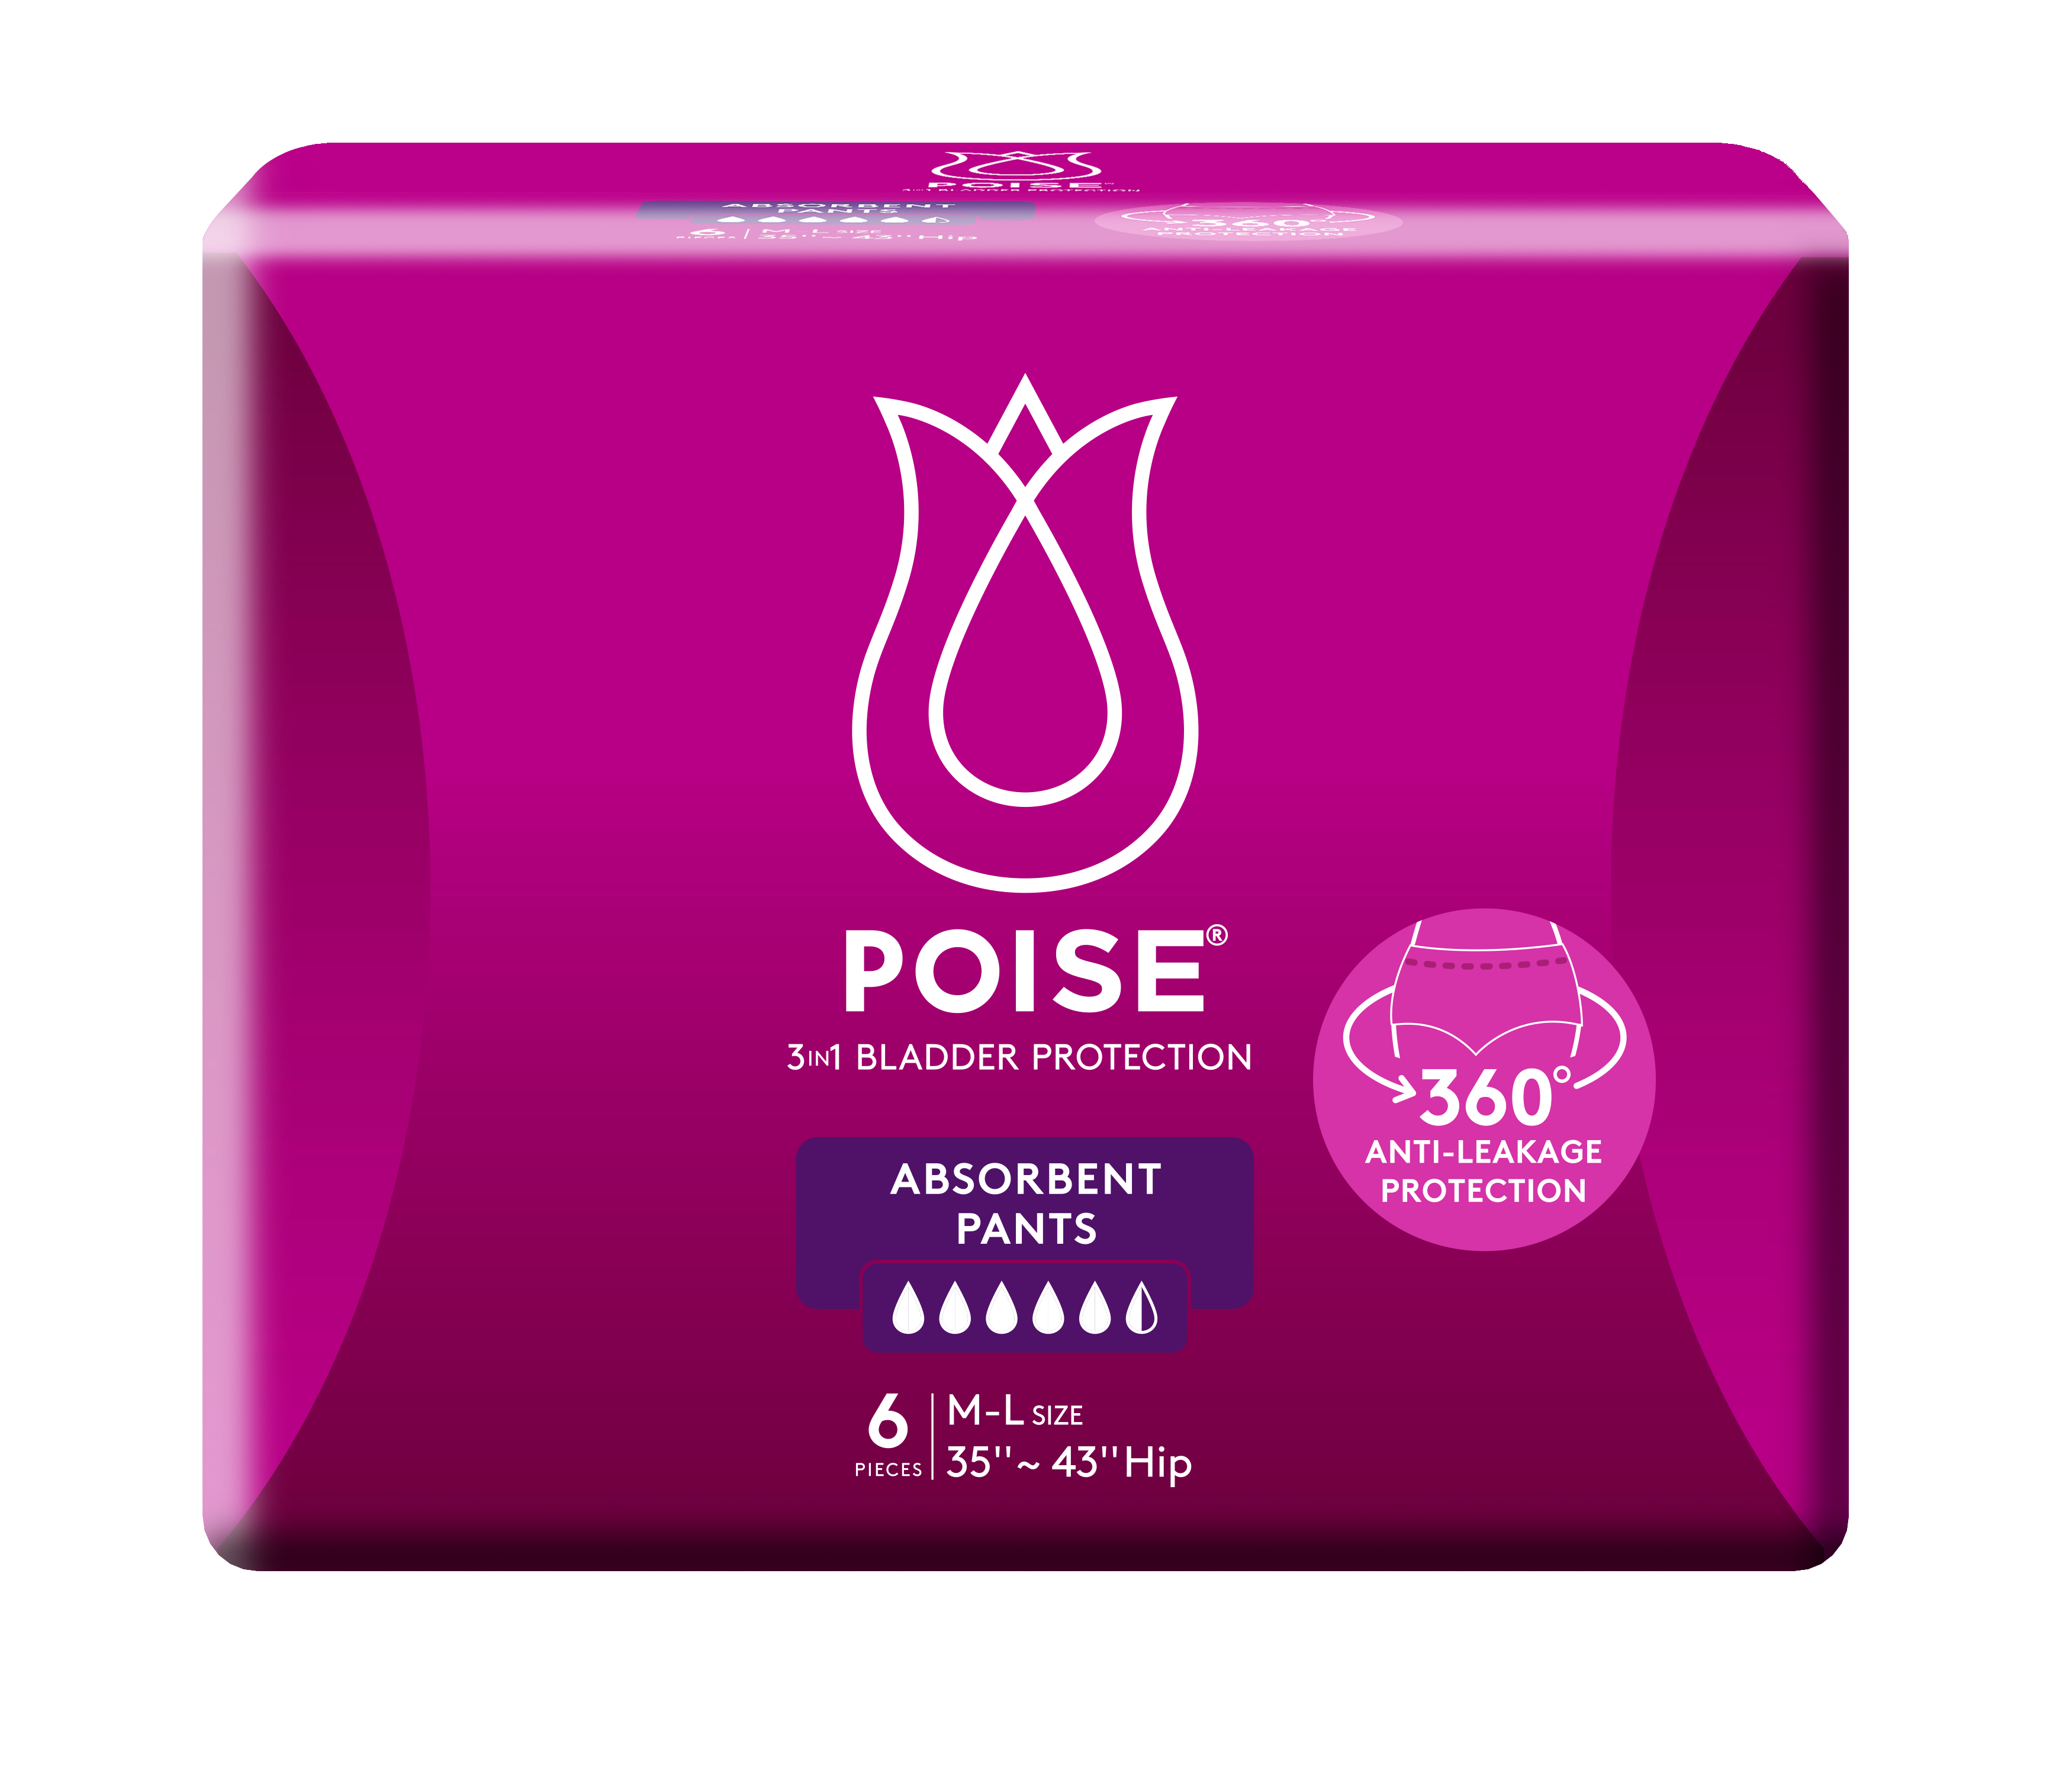 Poise Absorbent Pants